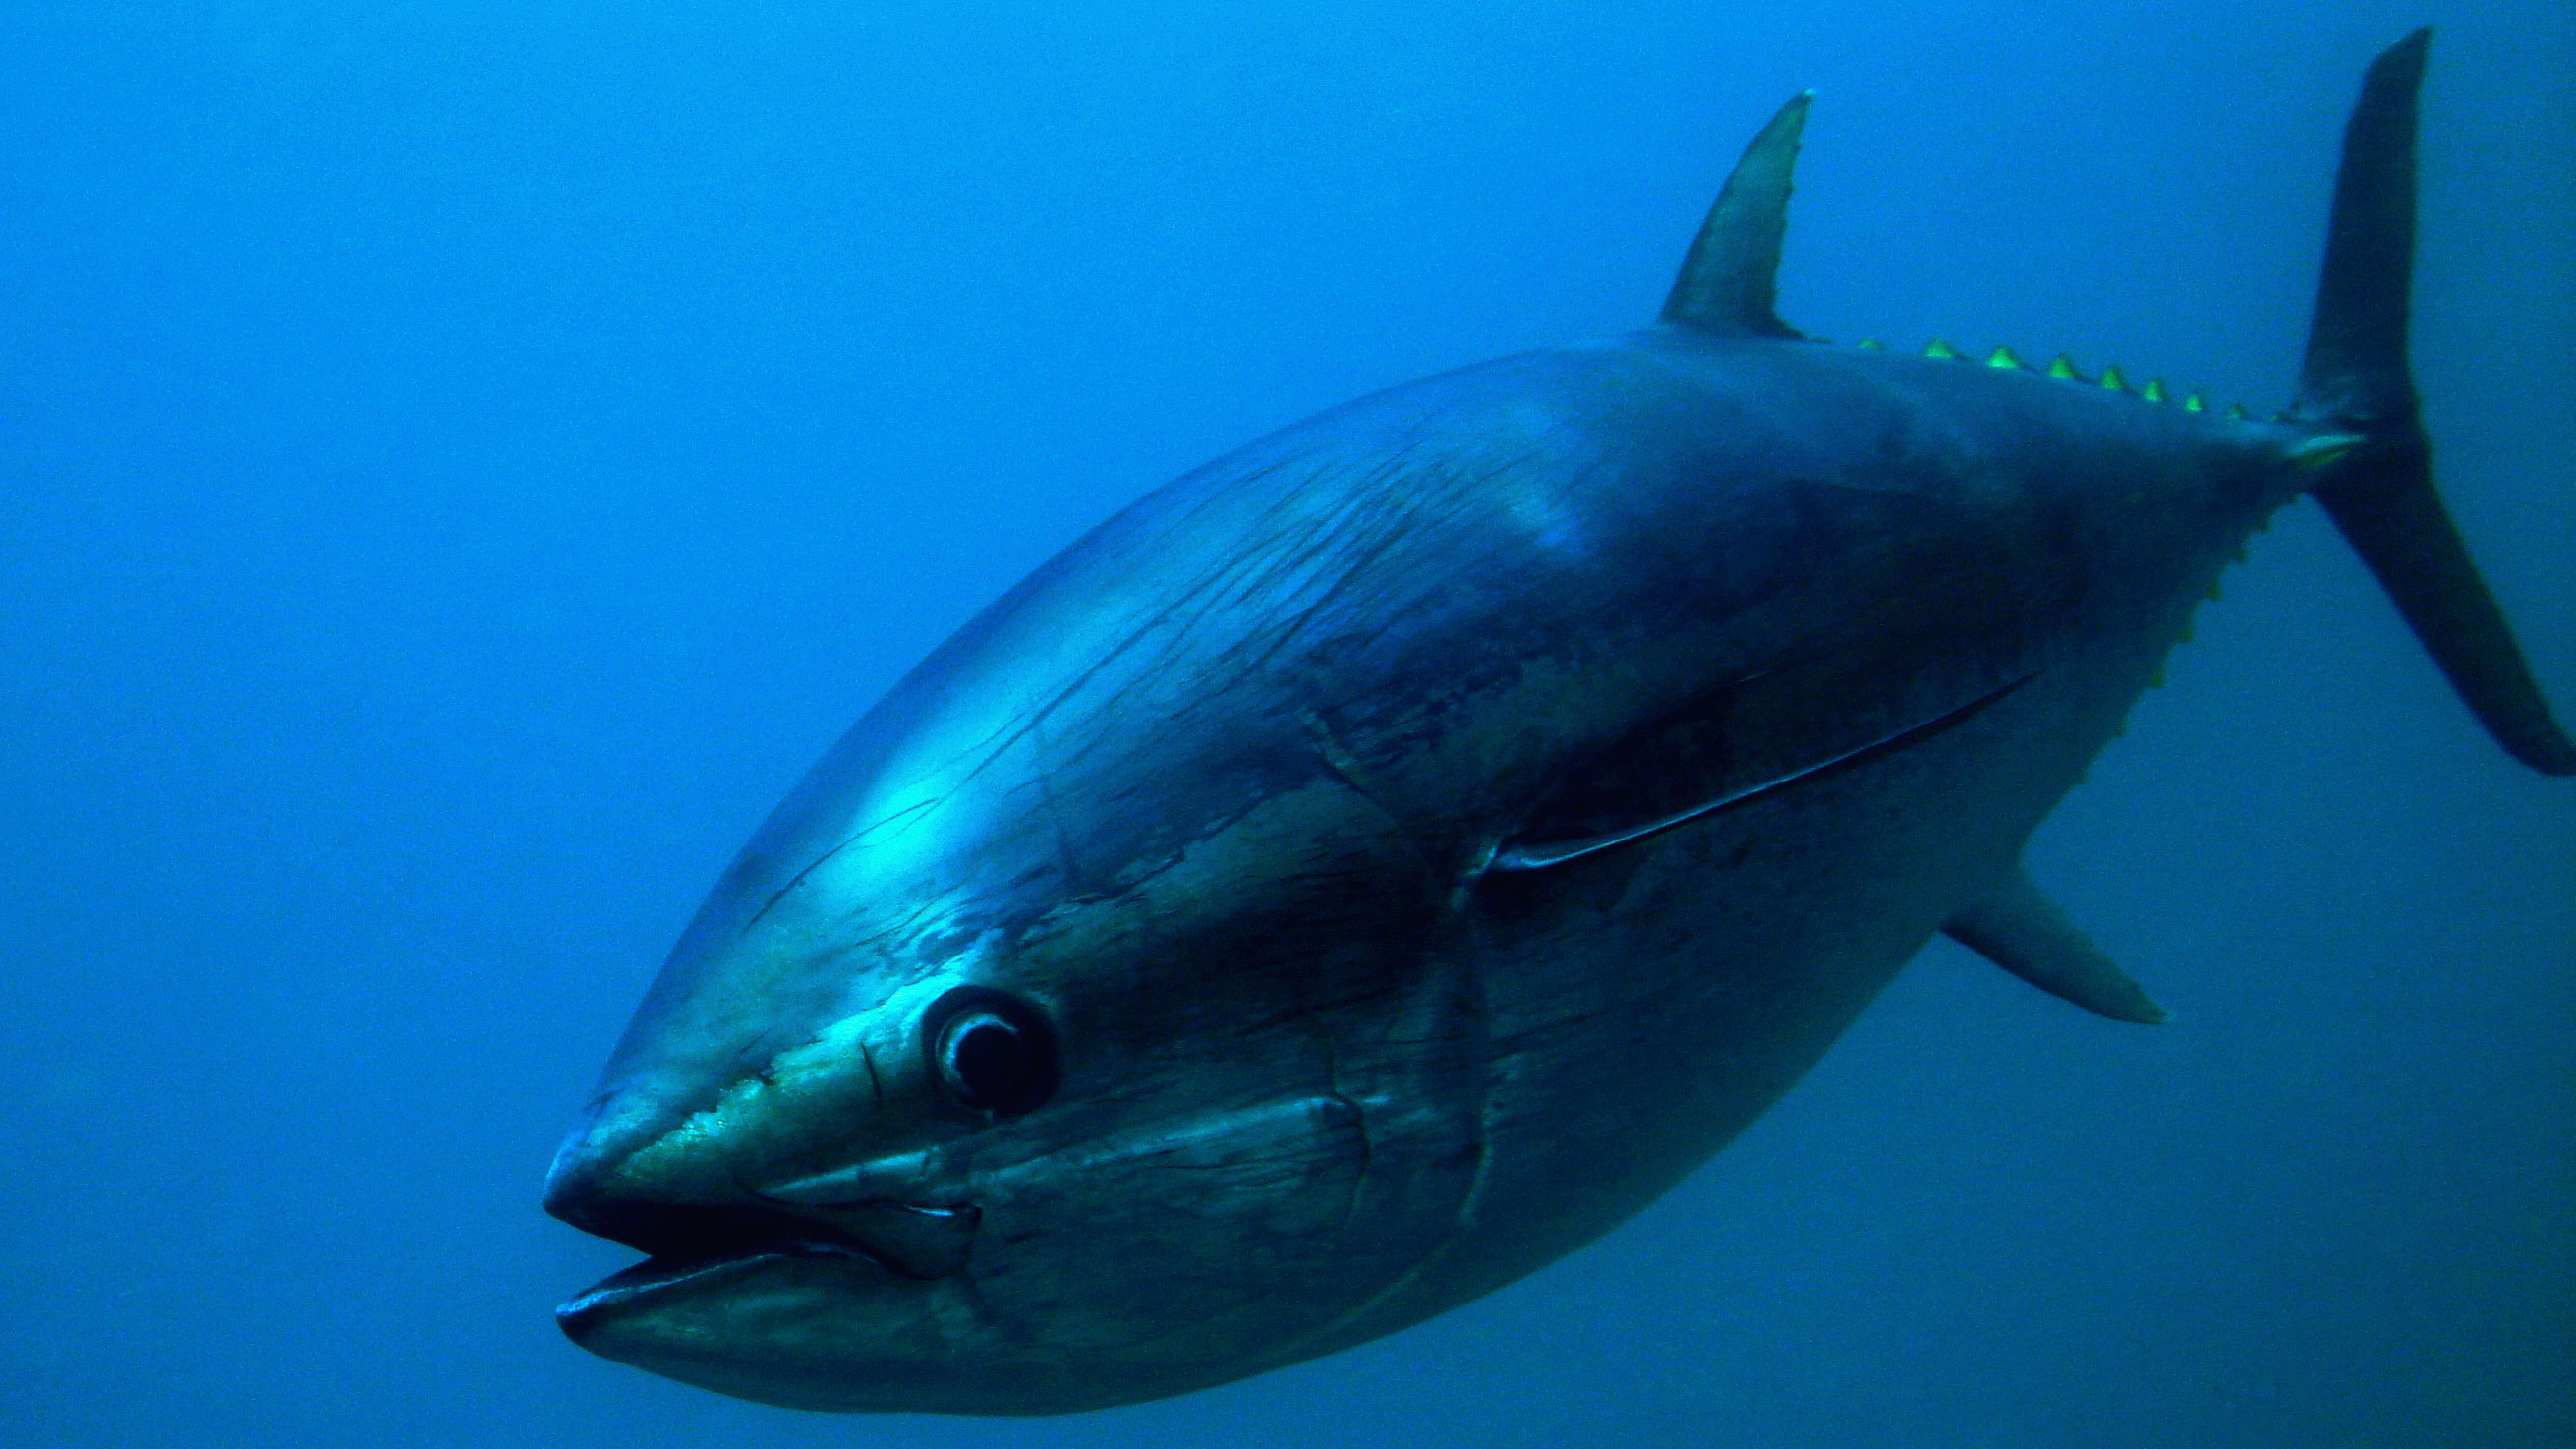 Implementing an OceanWide Harvest Strategy for Pacific Bluefin Tuna